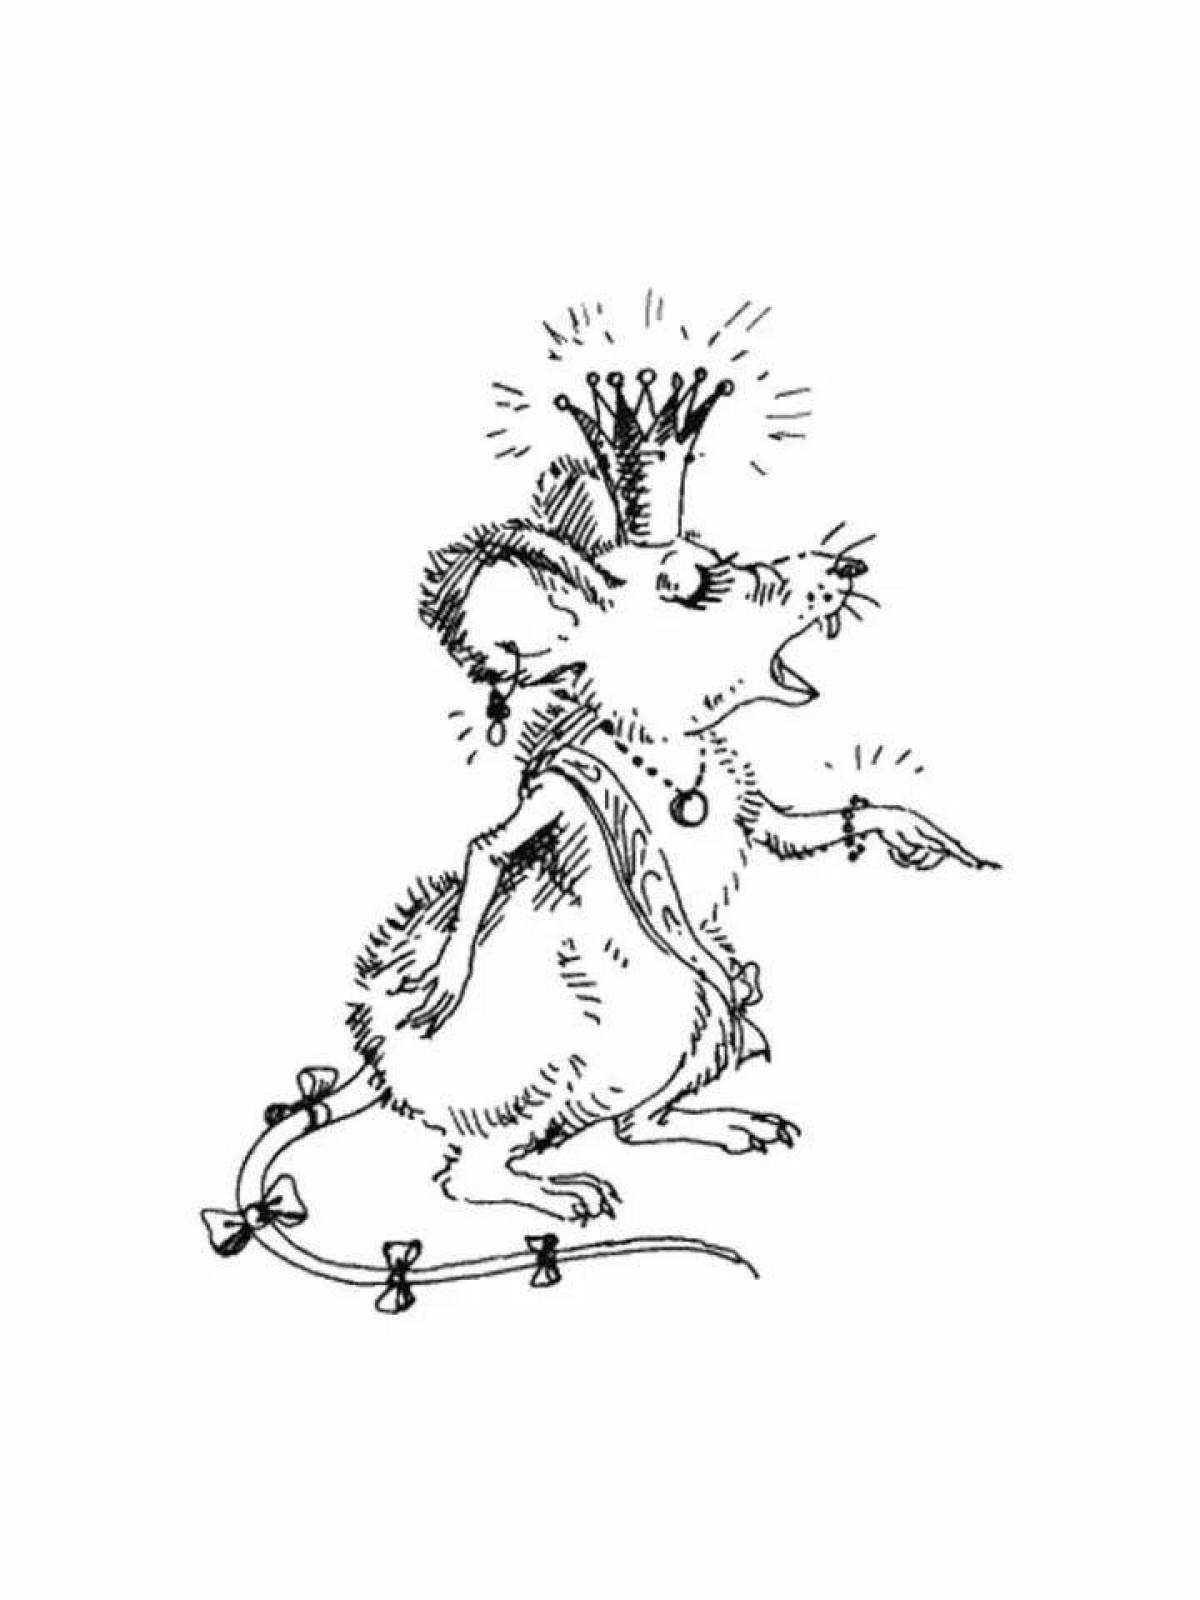 Humorous mouse king coloring page